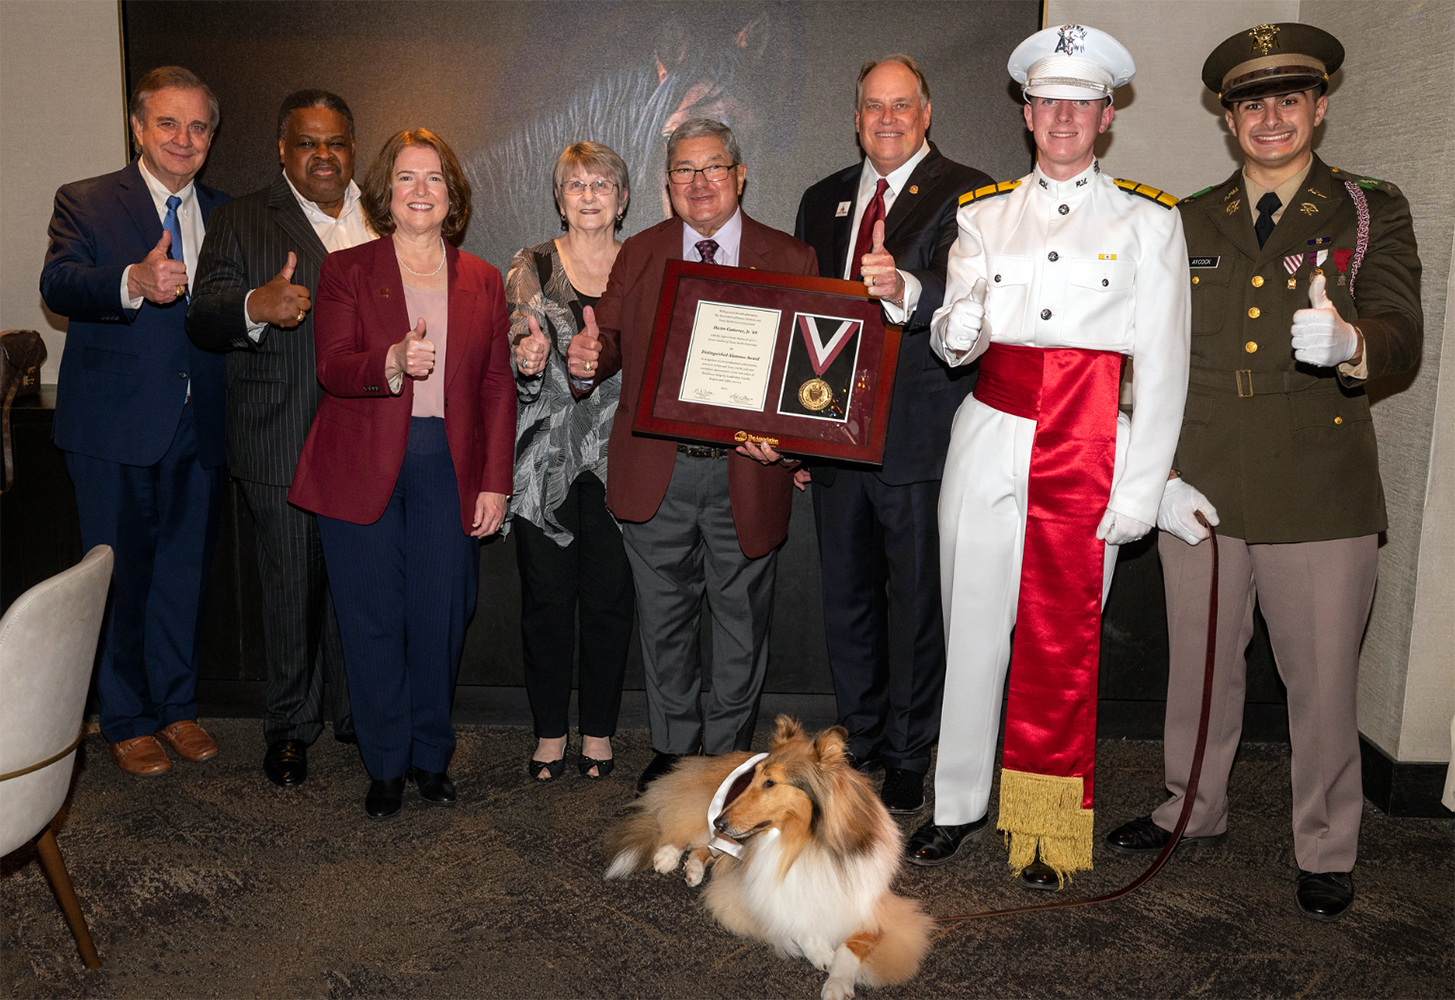 1969 Texas A&amp;M mathematics graduate Hector Gutierrez Jr. and his wife Debbie Gutierrez flash gig 'ems while posing with various Texas A&amp;M administrators during a surprise announcement of his 2023 Texas A&amp;M University Distinguished Alumnus Award honor